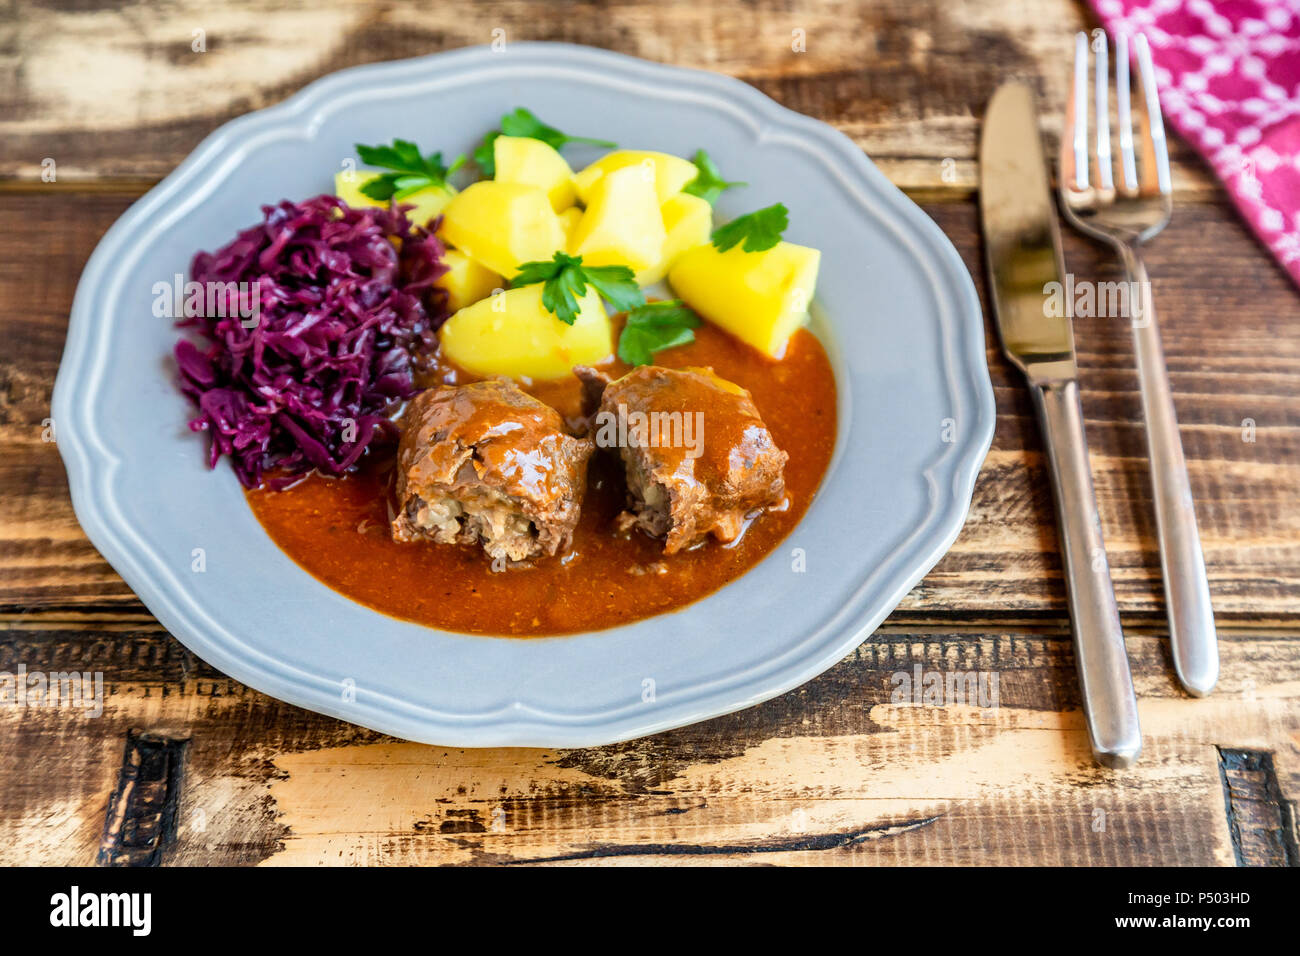 Beef roulade with potato and red cabbage on plate Stock Photo